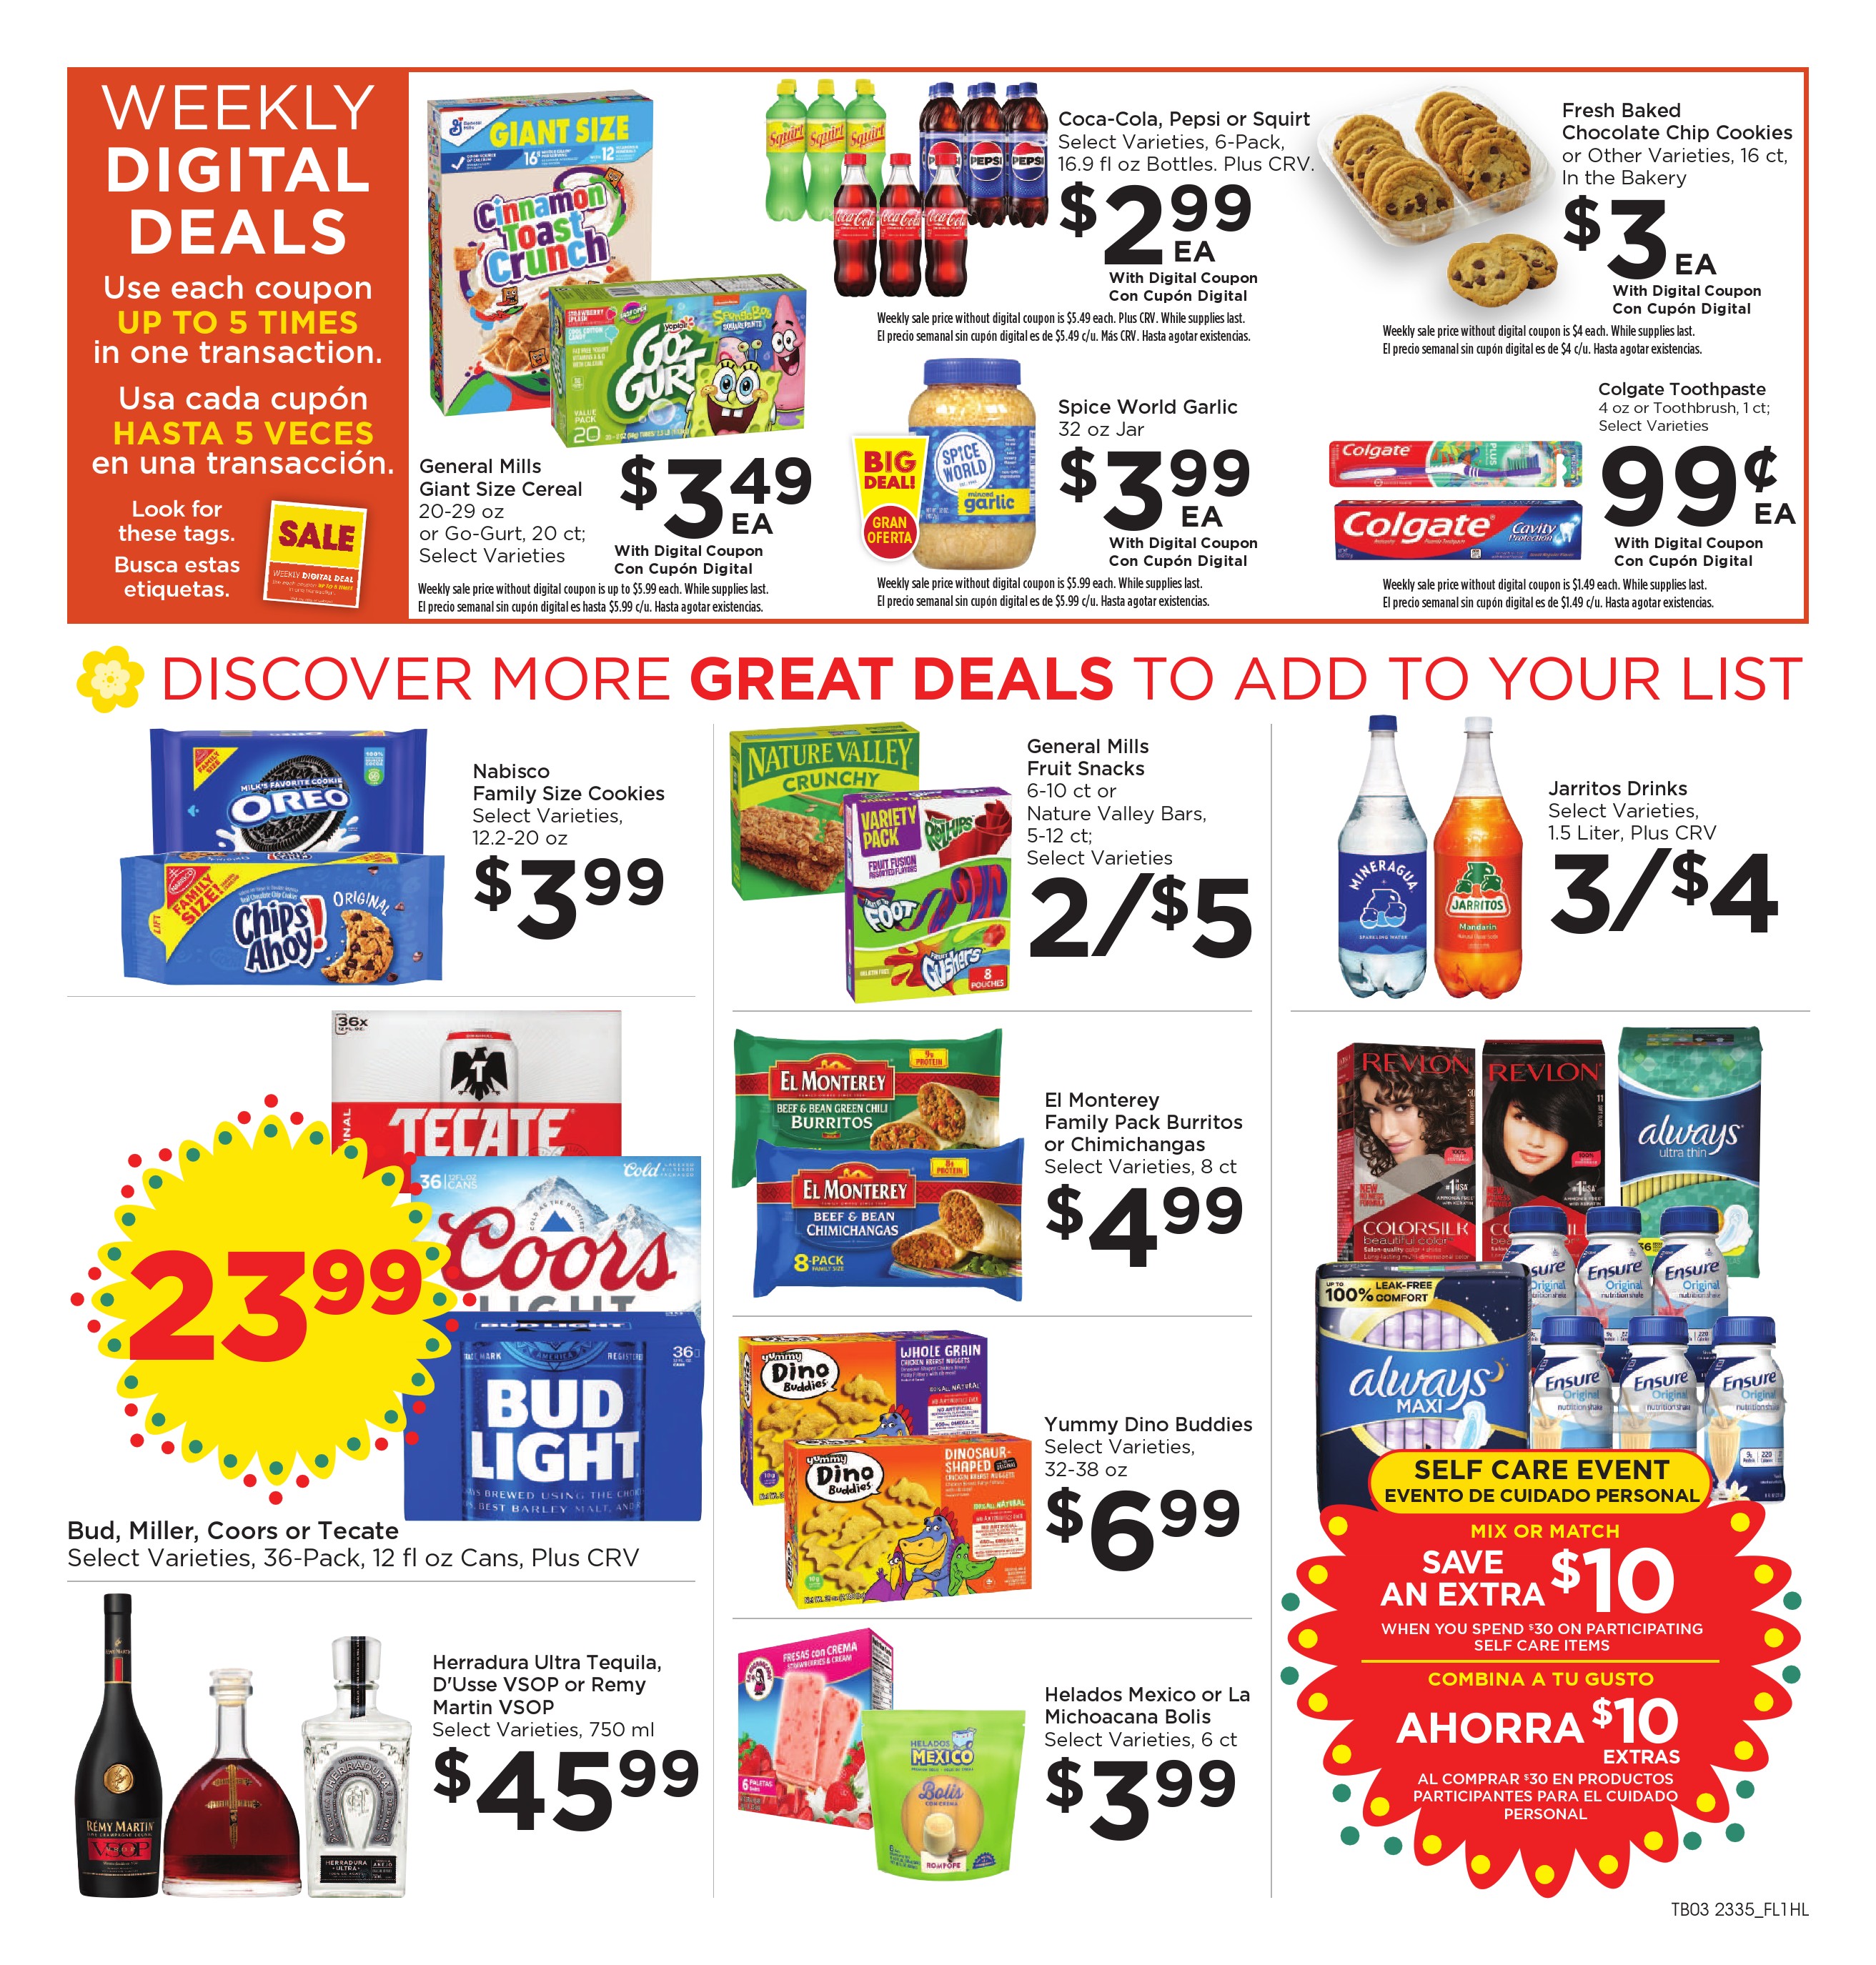 Food 4 Less Weekly Ad Preview: (October 4 - October 10 2023)